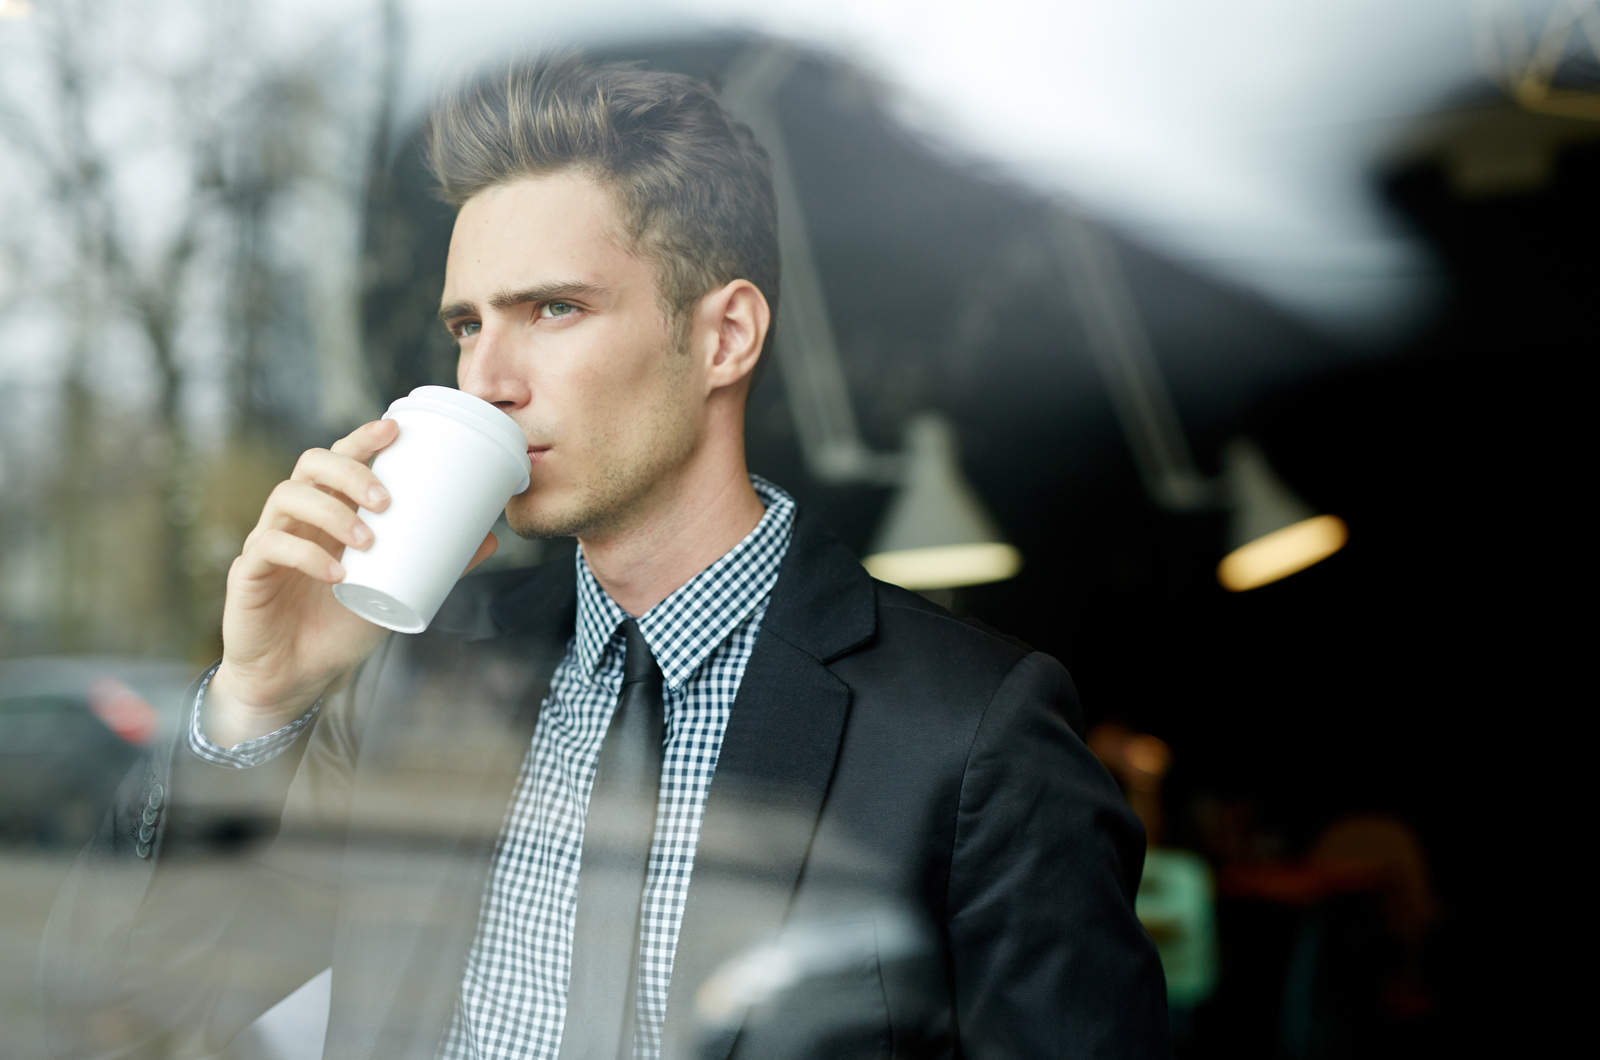 man drinking coffee looking into distance